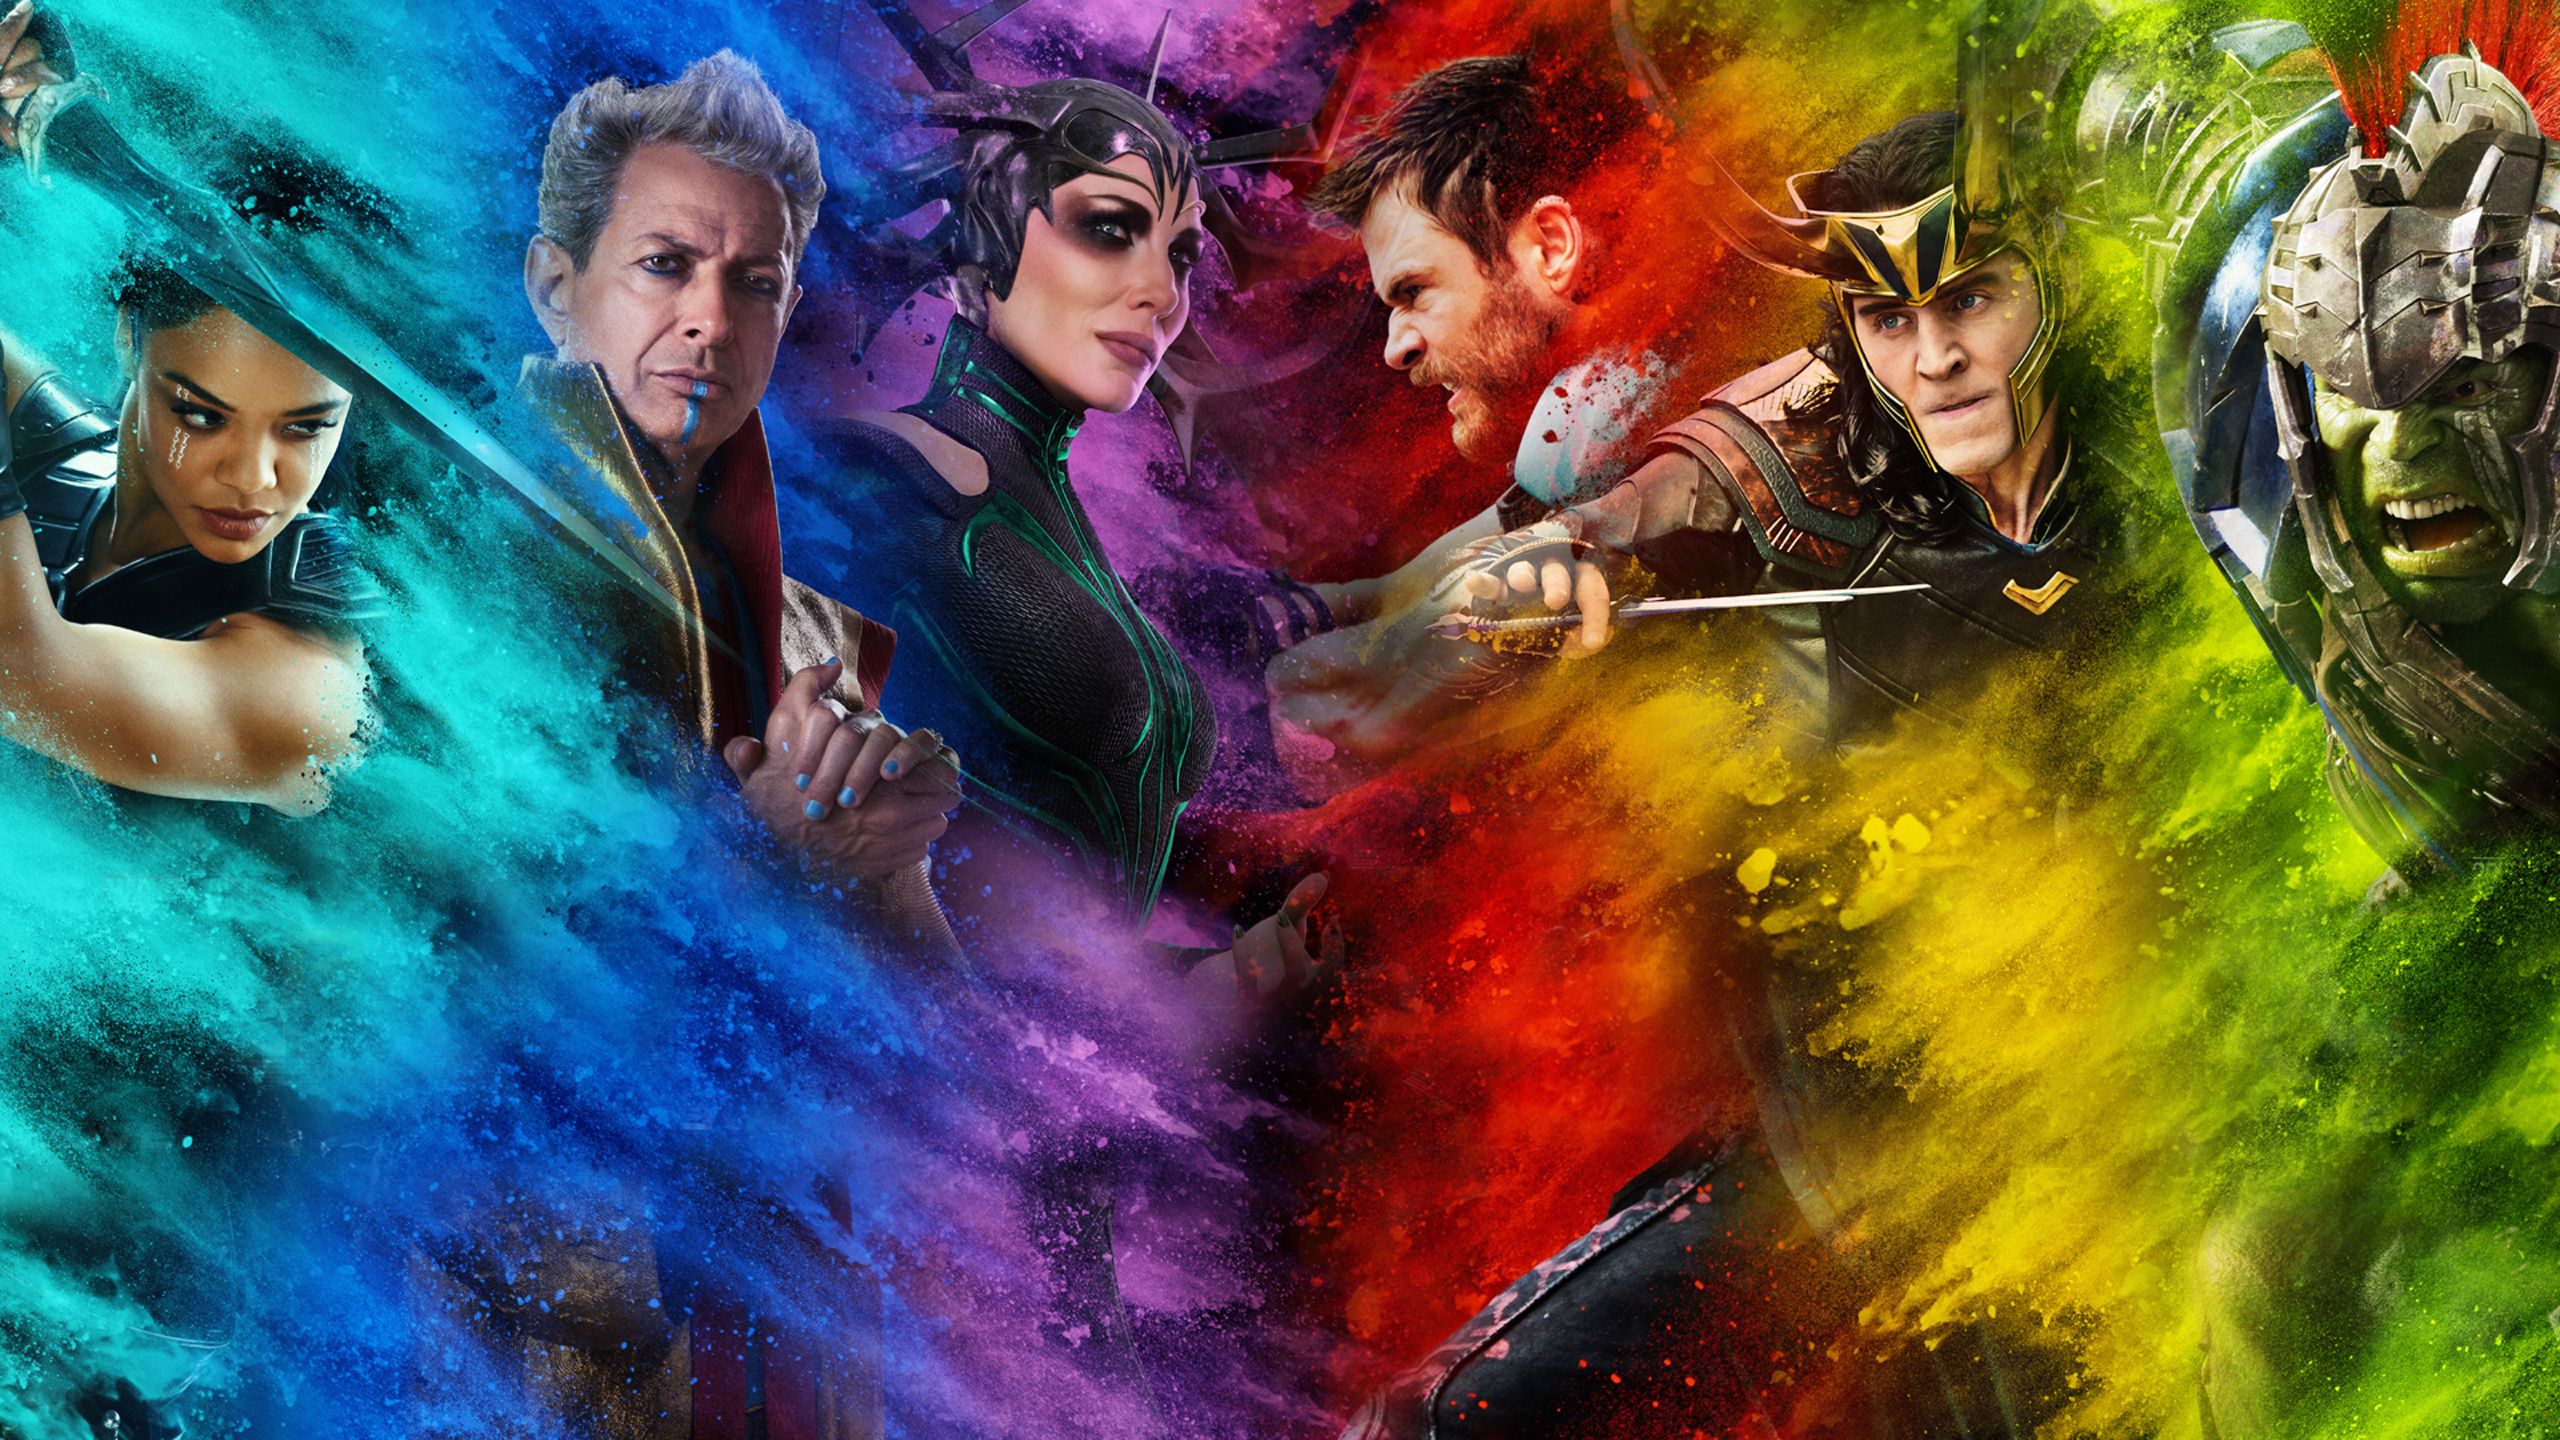 Thor Ragnarok Poster 1440P Resolution Wallpaper, HD Movies 4K Wallpaper, Image, Photo and Background